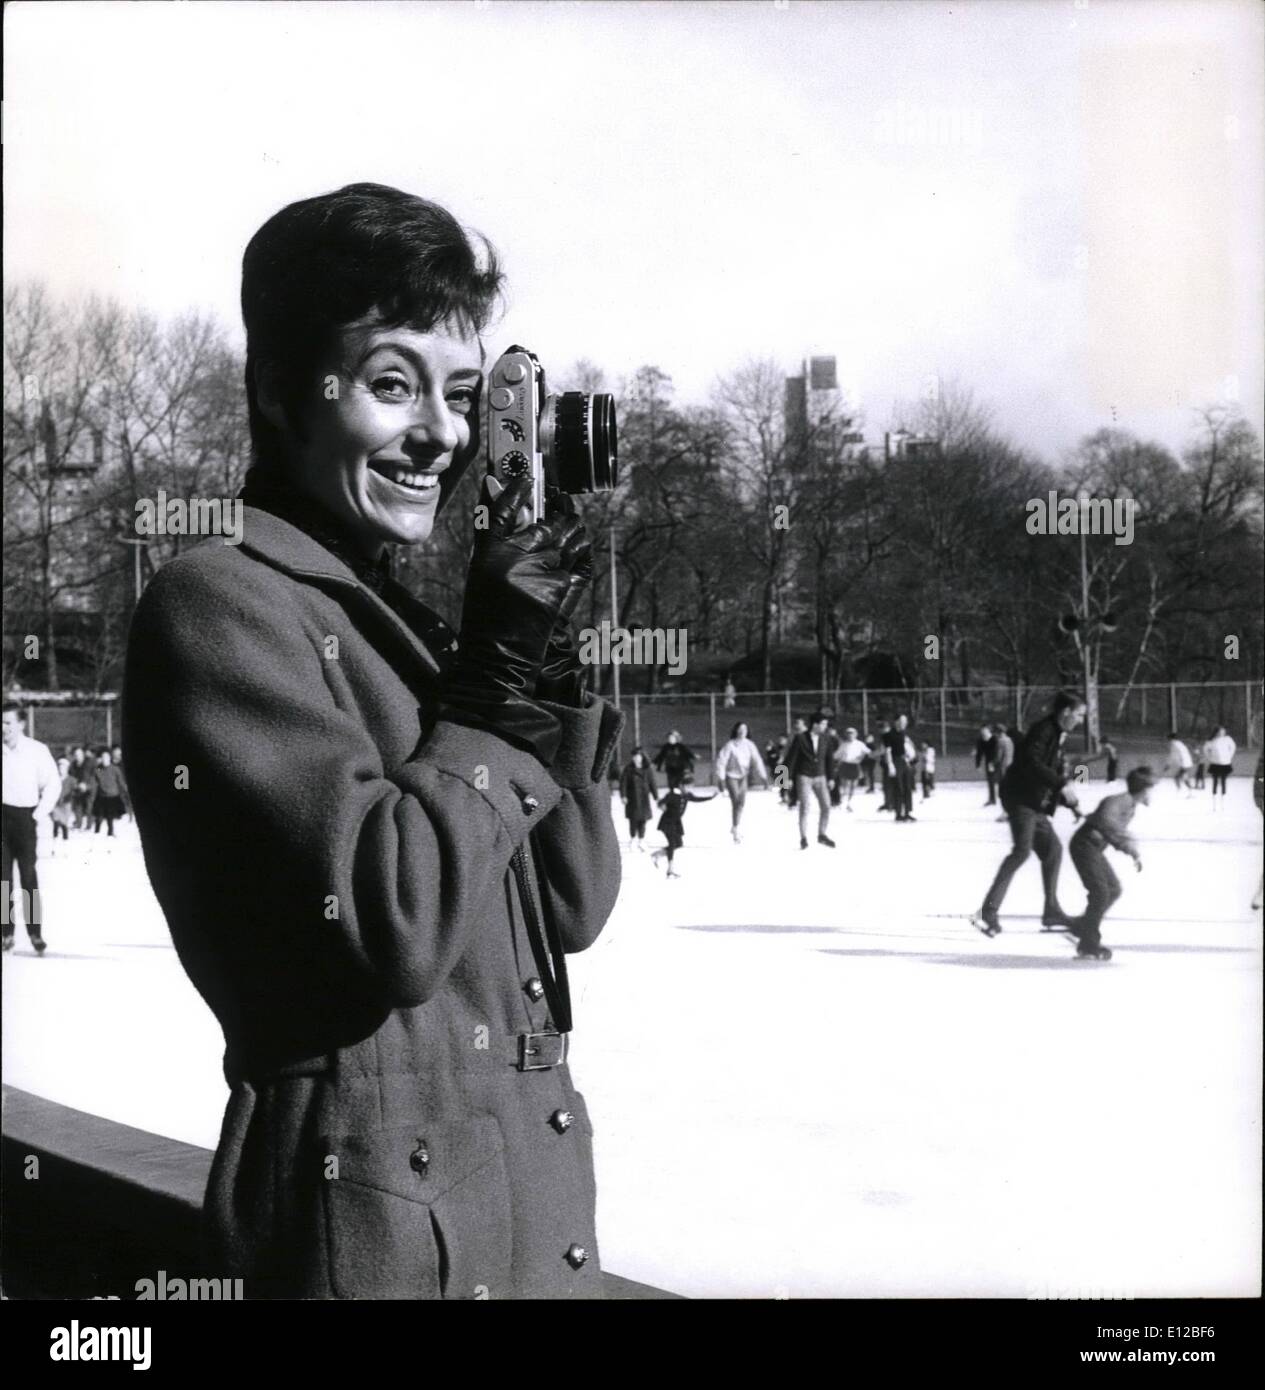 Dec. 09, 2011 - Famous singer Caterina Valente - staring now nightly at the plaza's Persian room - enjoying the sun at central park's skating rink. Credit : Perry Kertz From keystne Stock Photo